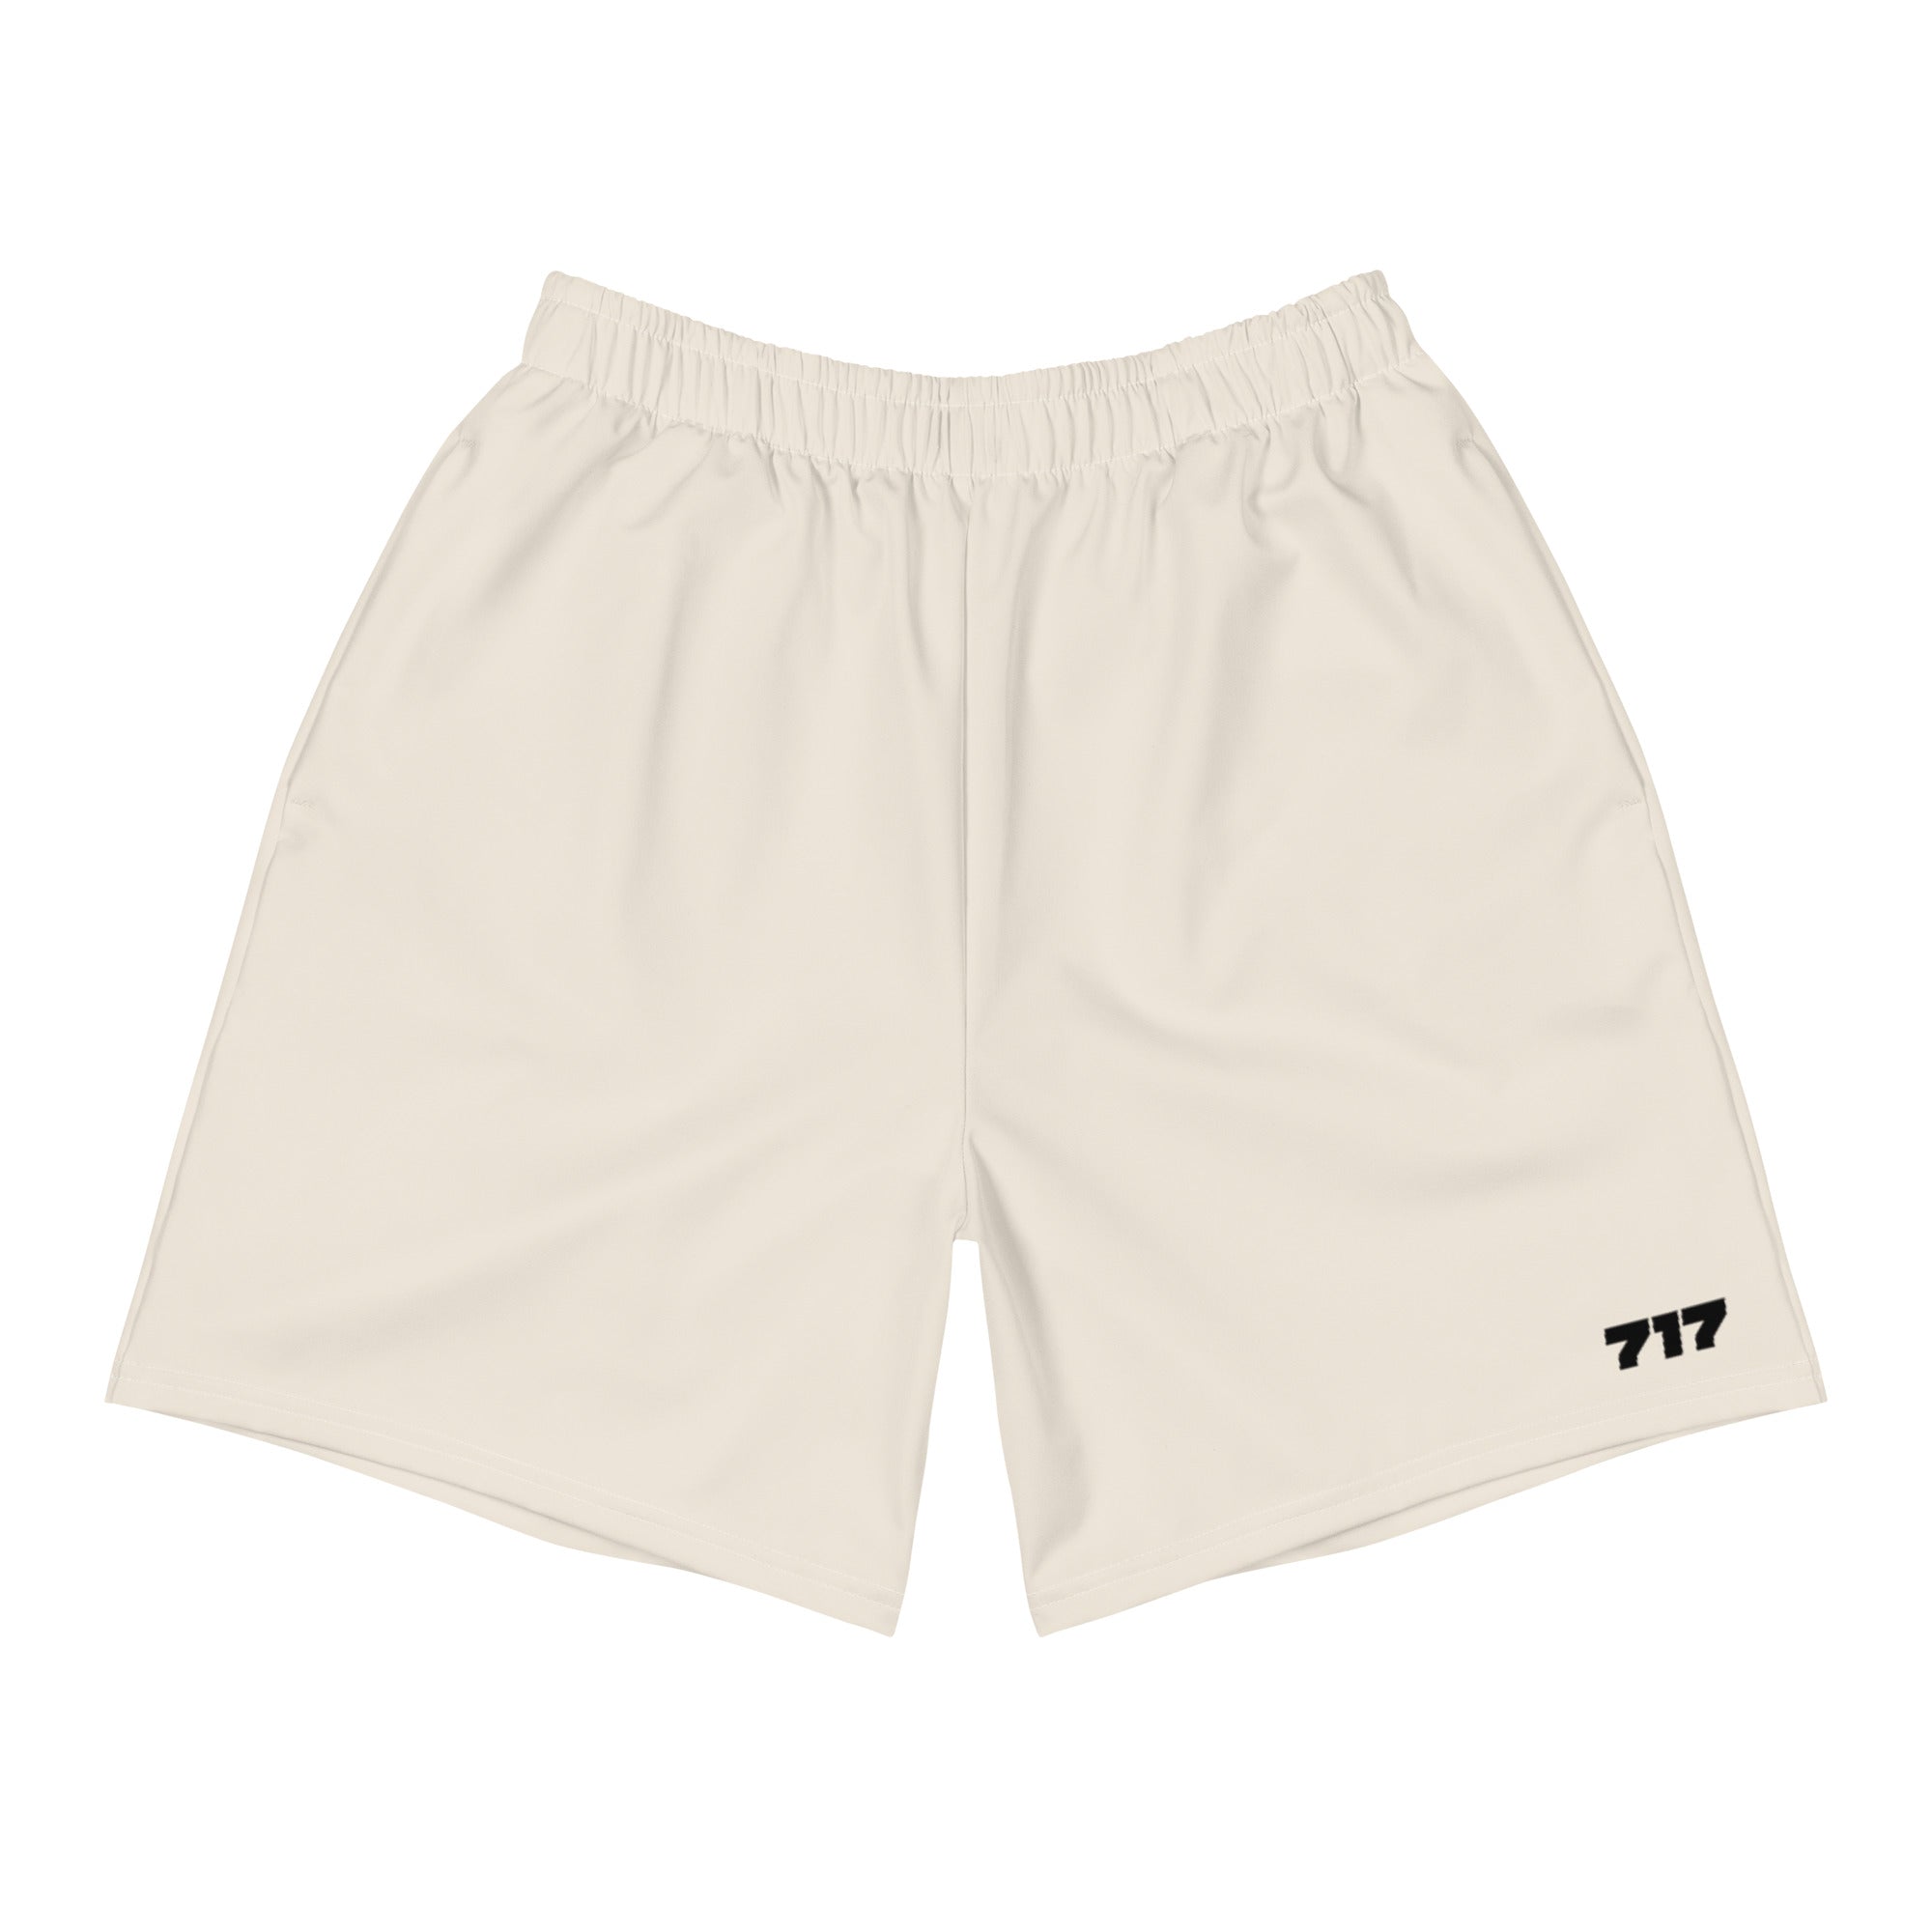 717 Ghost Shorts